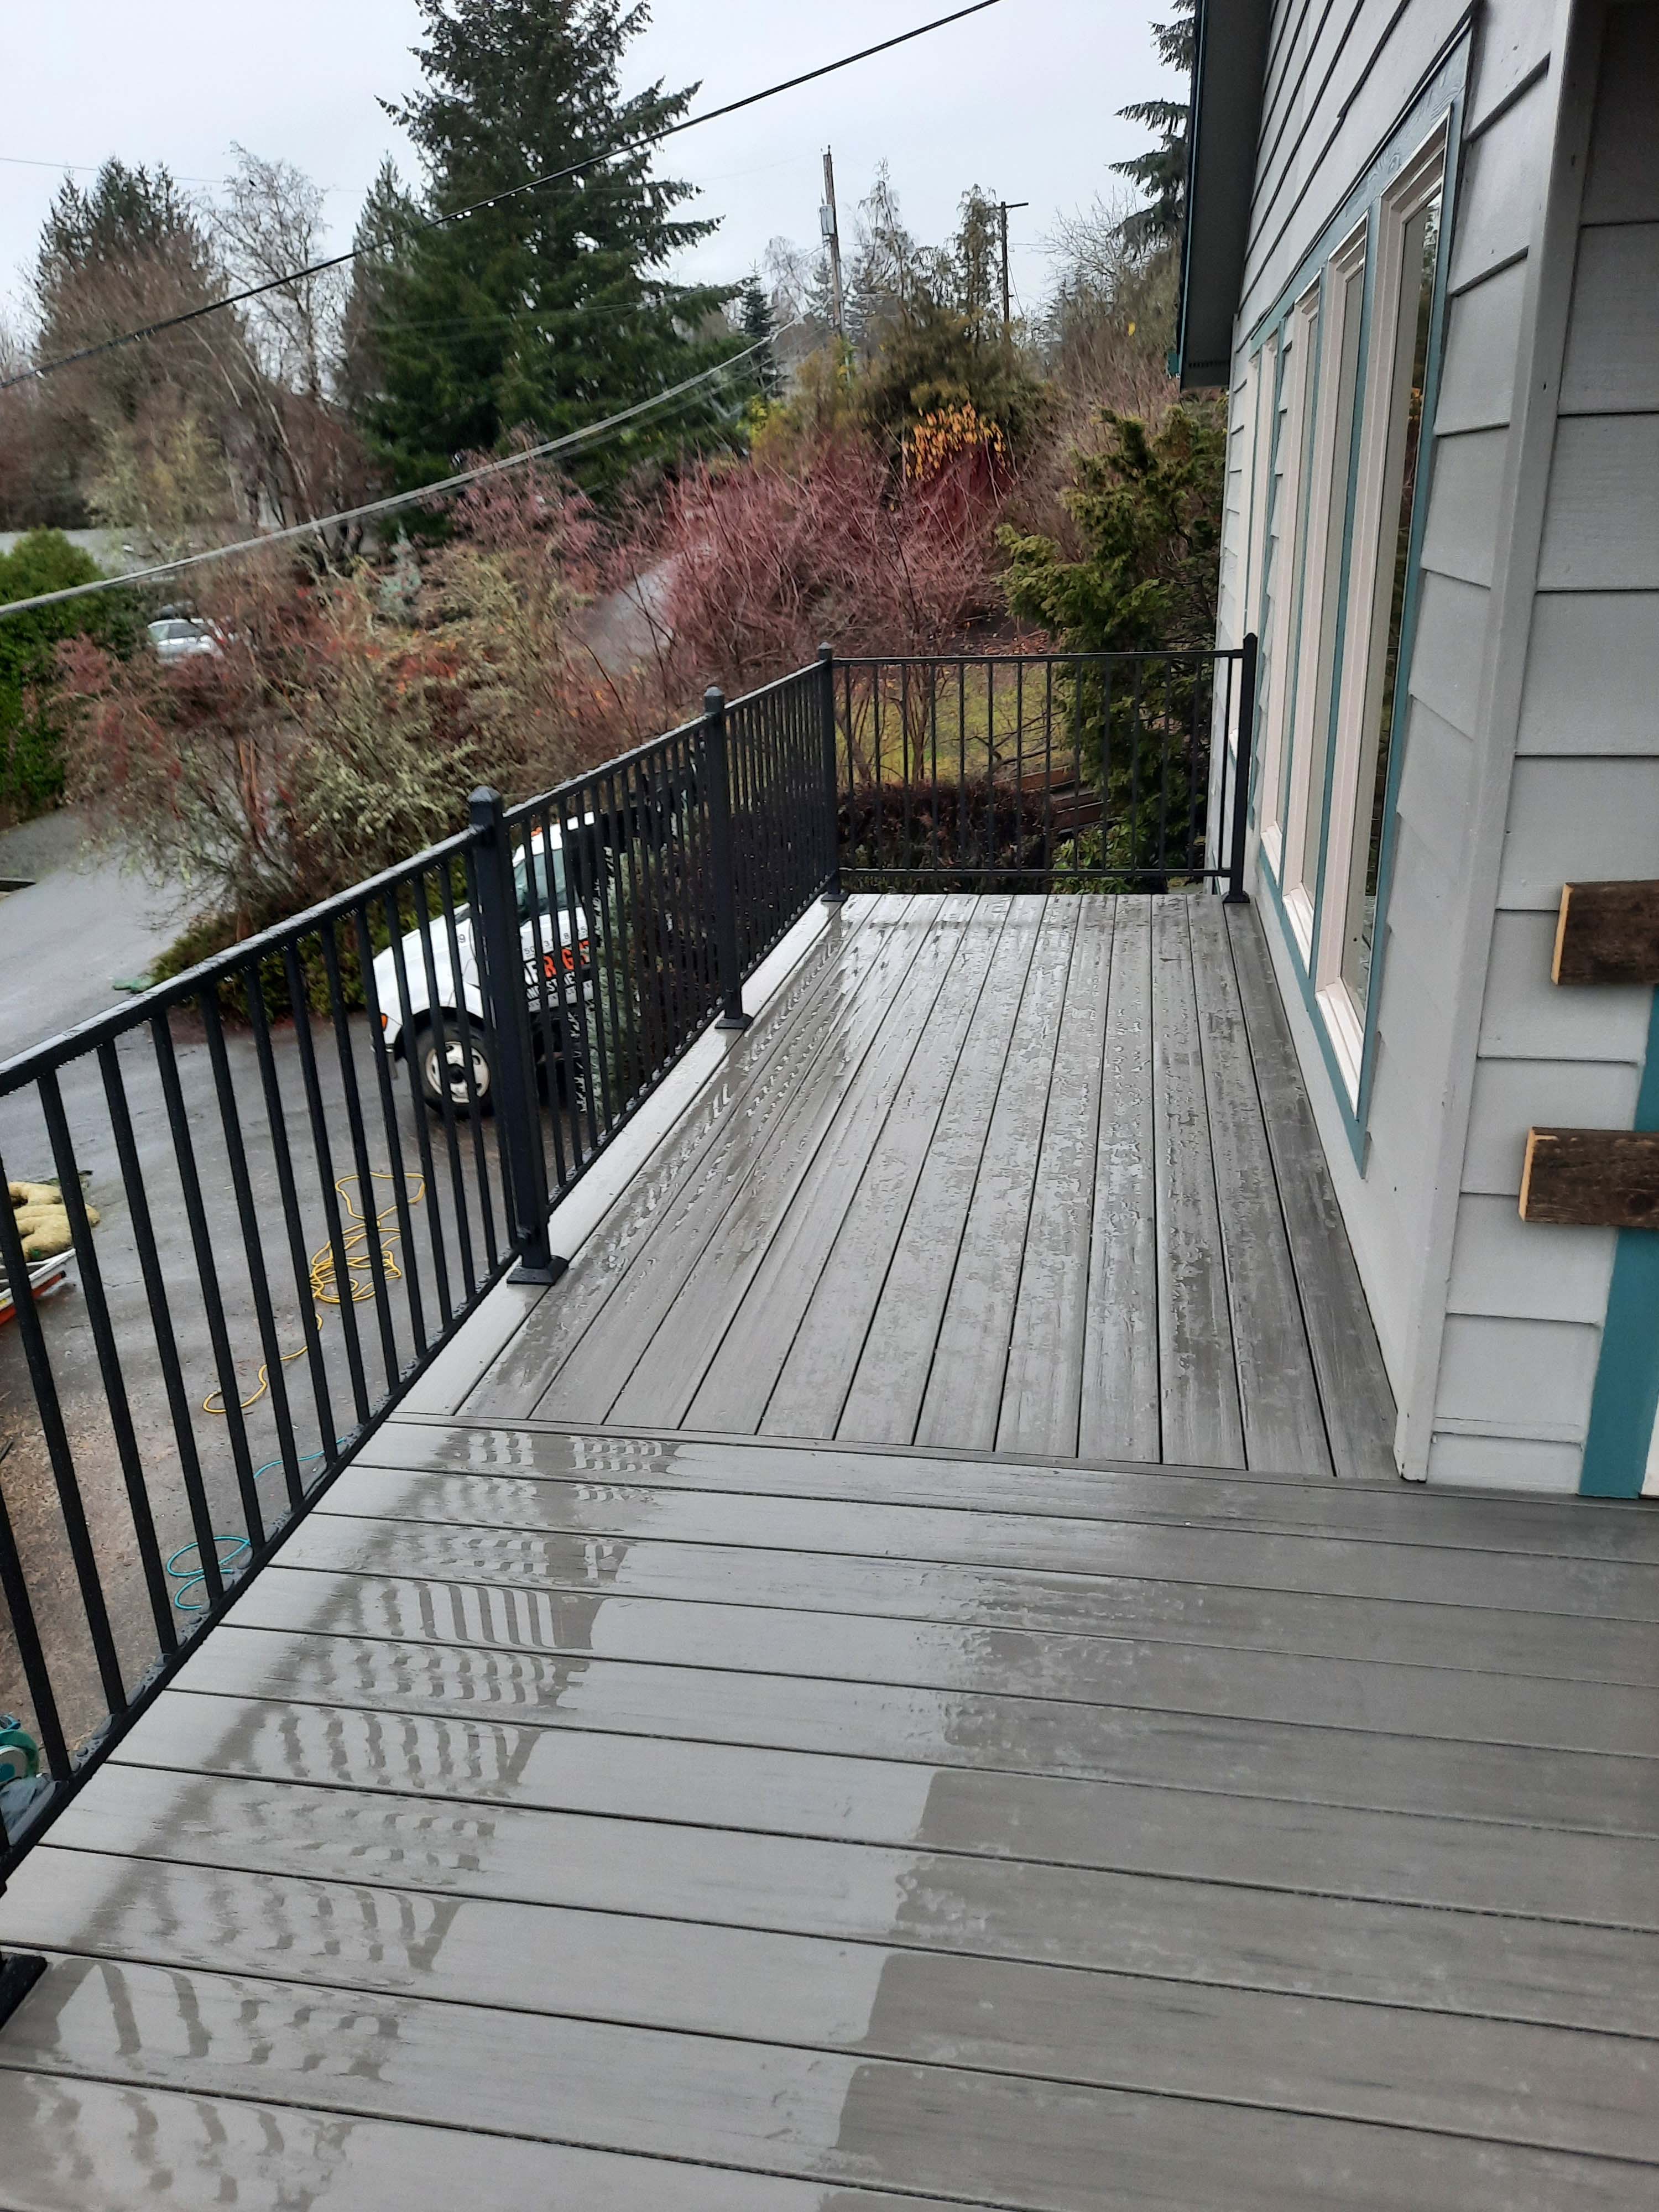 Remodeled wood deck with metal railings and gray colored planks